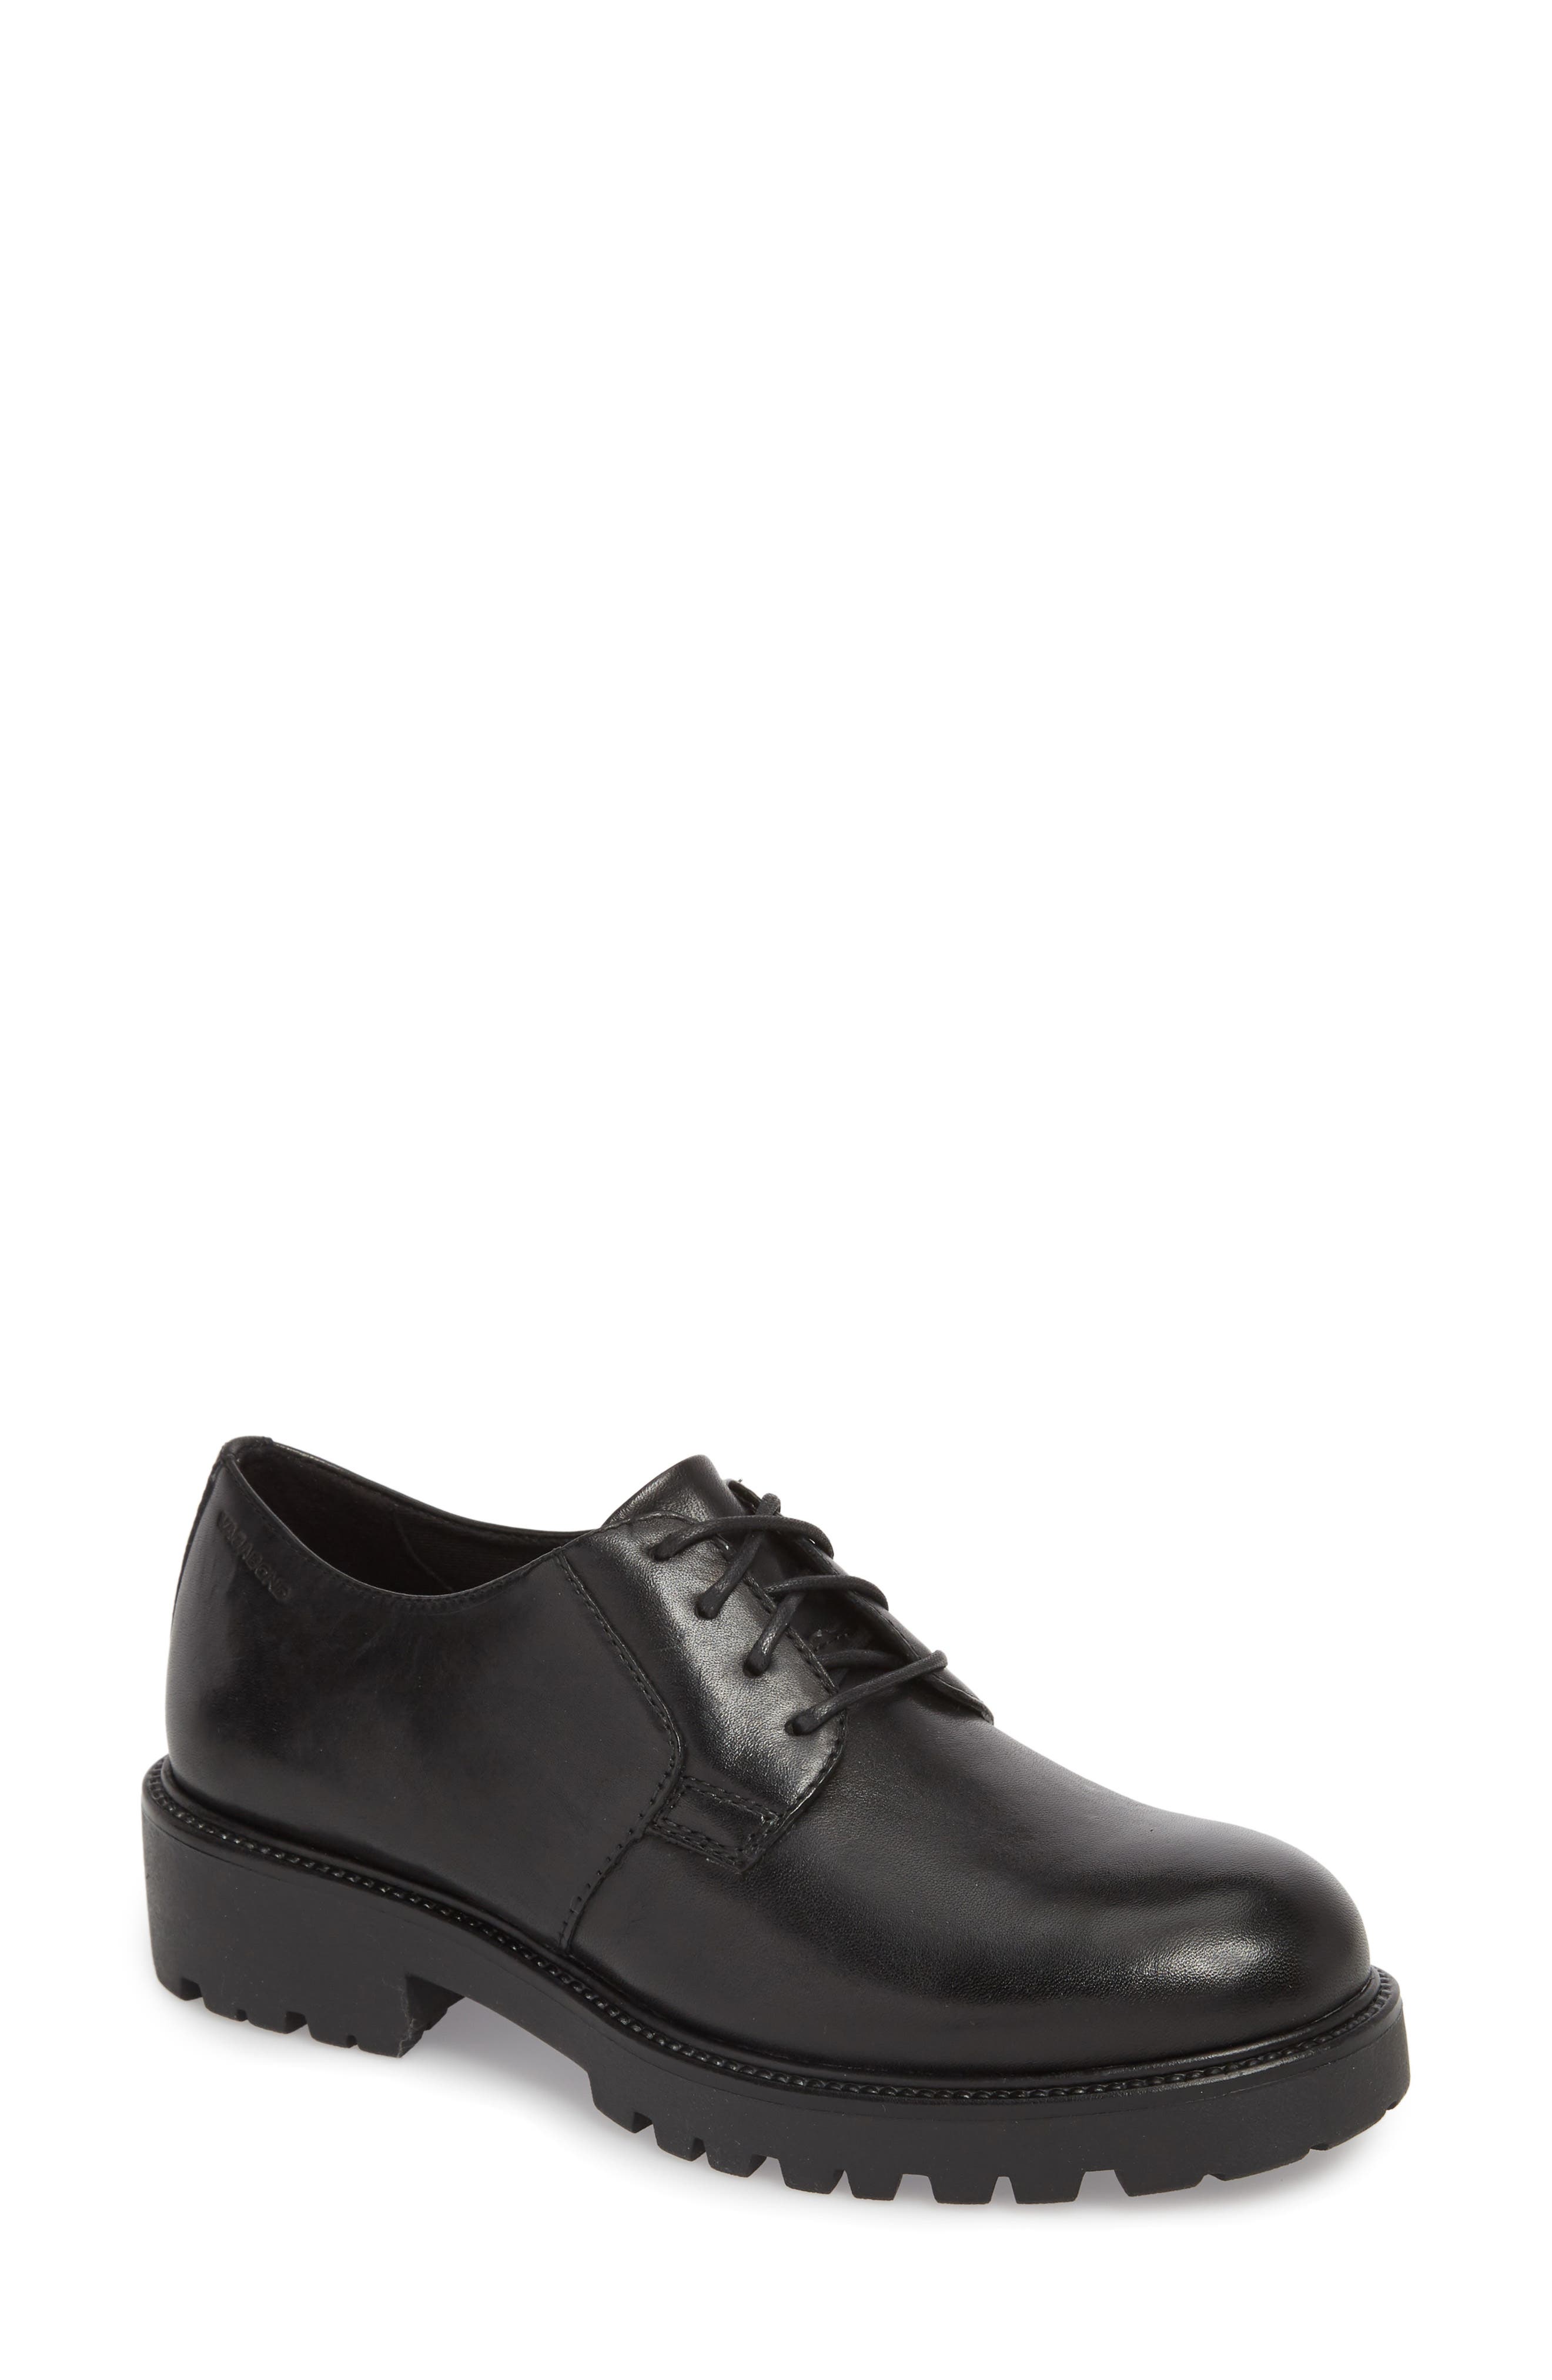 nordstrom womens oxford shoes